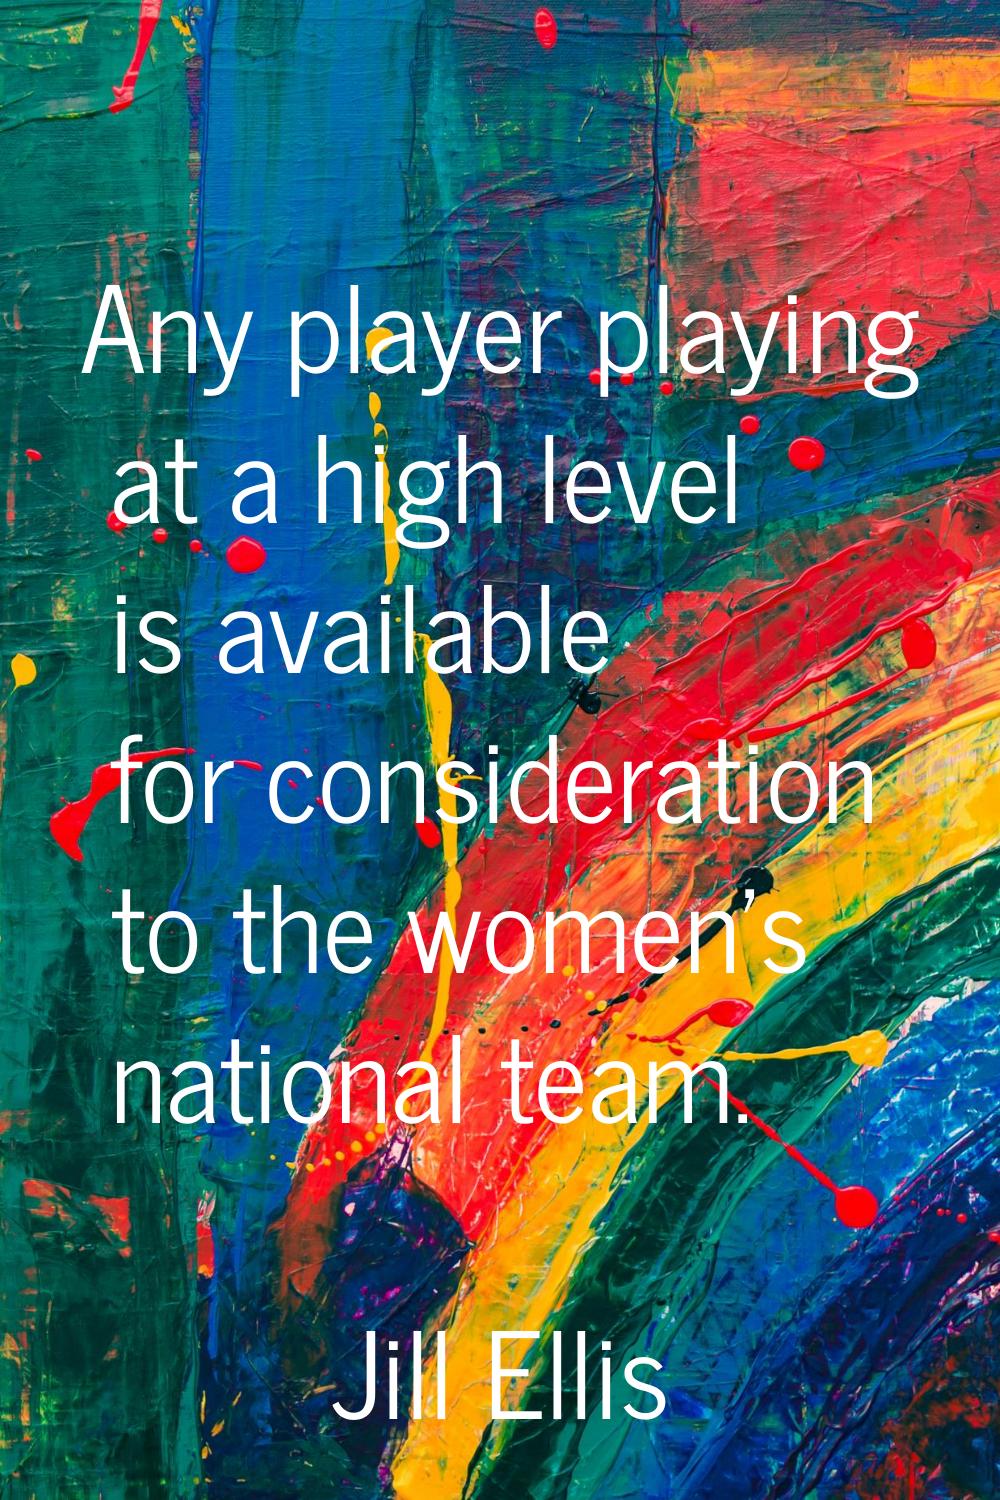 Any player playing at a high level is available for consideration to the women's national team.